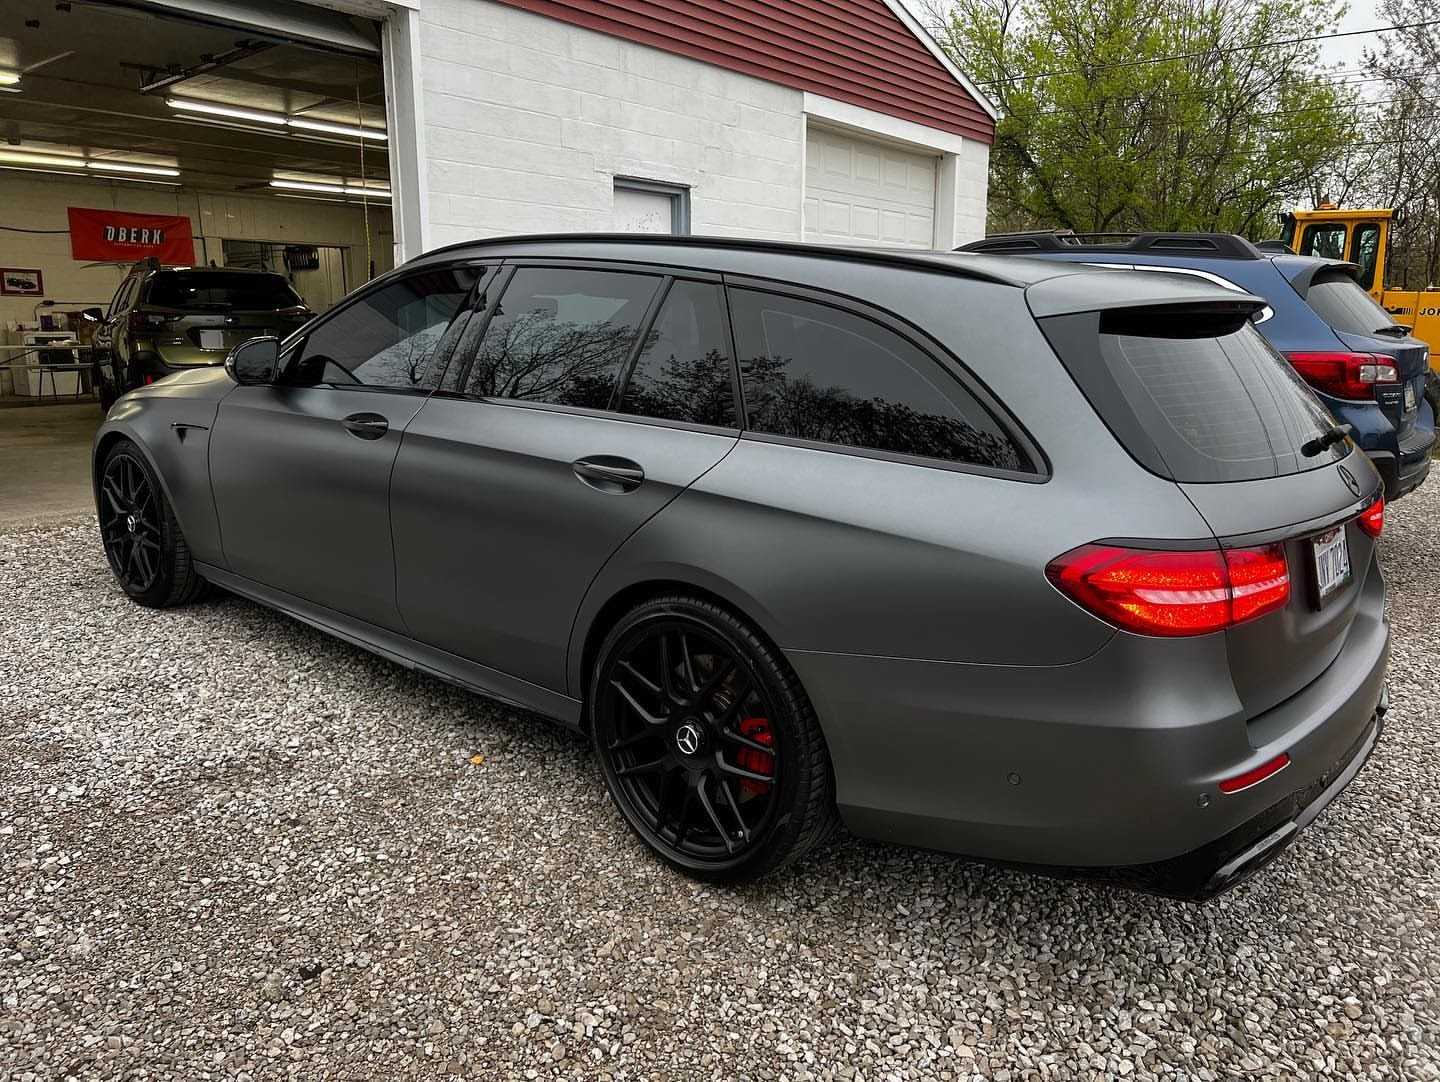 2019 Mercedes-Benz E63 AMG S - 2019 E63 AMG S Wagon - Selenite Grey Magno - LOW MILES - Used - VIN WDDZH8KB1KA680250 - 14,228 Miles - 8 cyl - AWD - Automatic - Wagon - Gray - Cleveland, OH 44106, United States